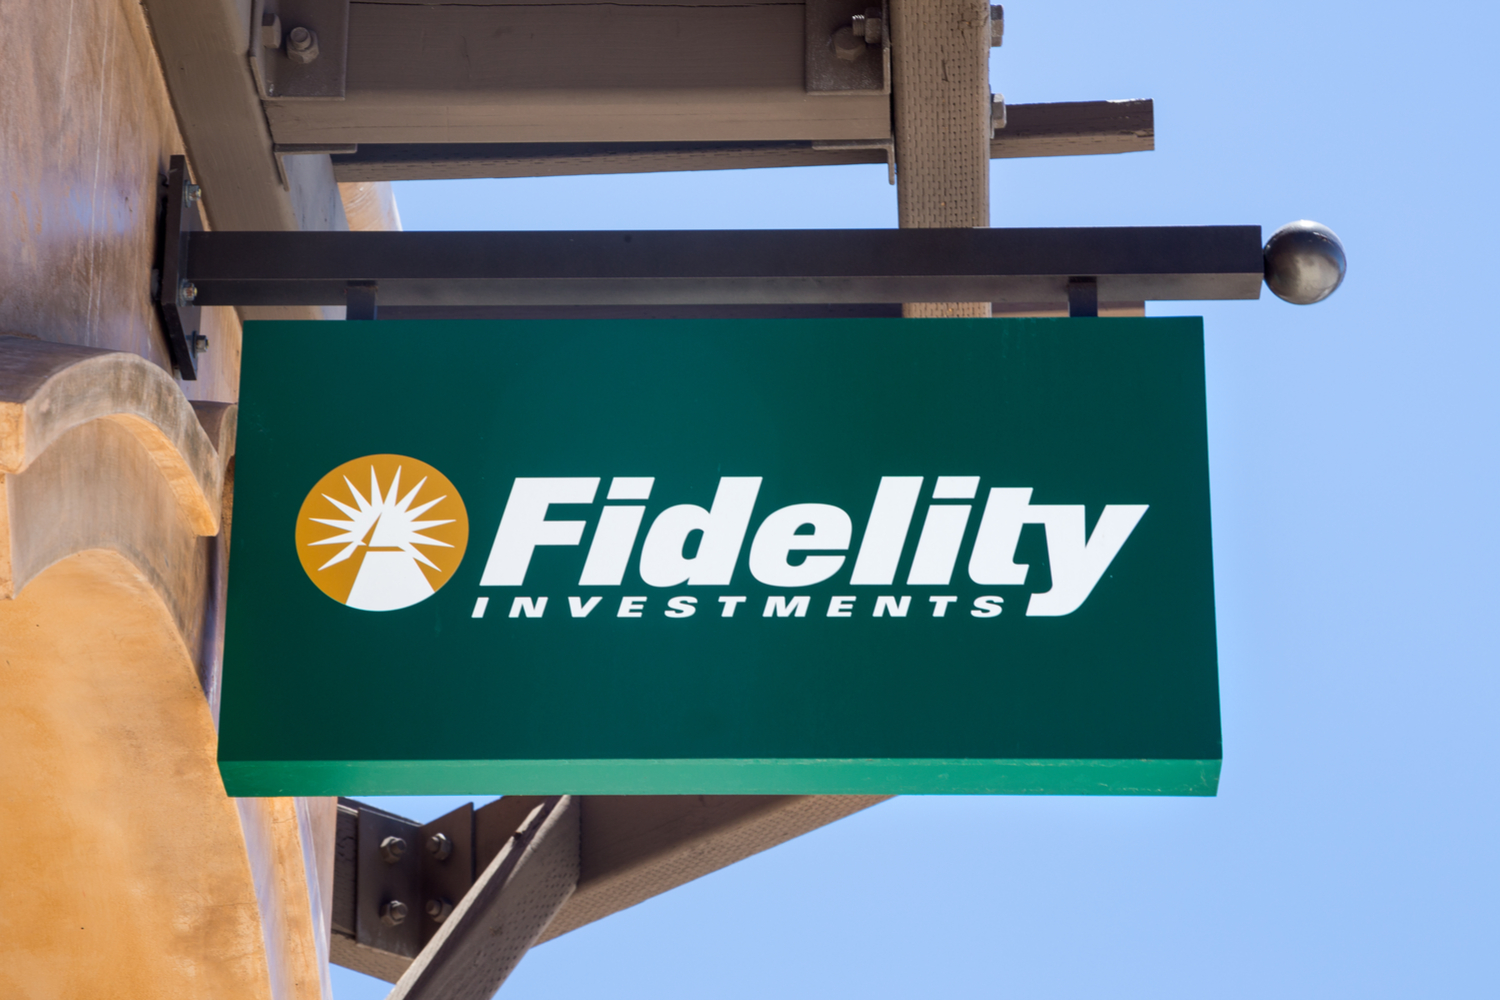 Fidelity Says Its Crypto Trading And Storage Platform Is In ‘Final Testing’